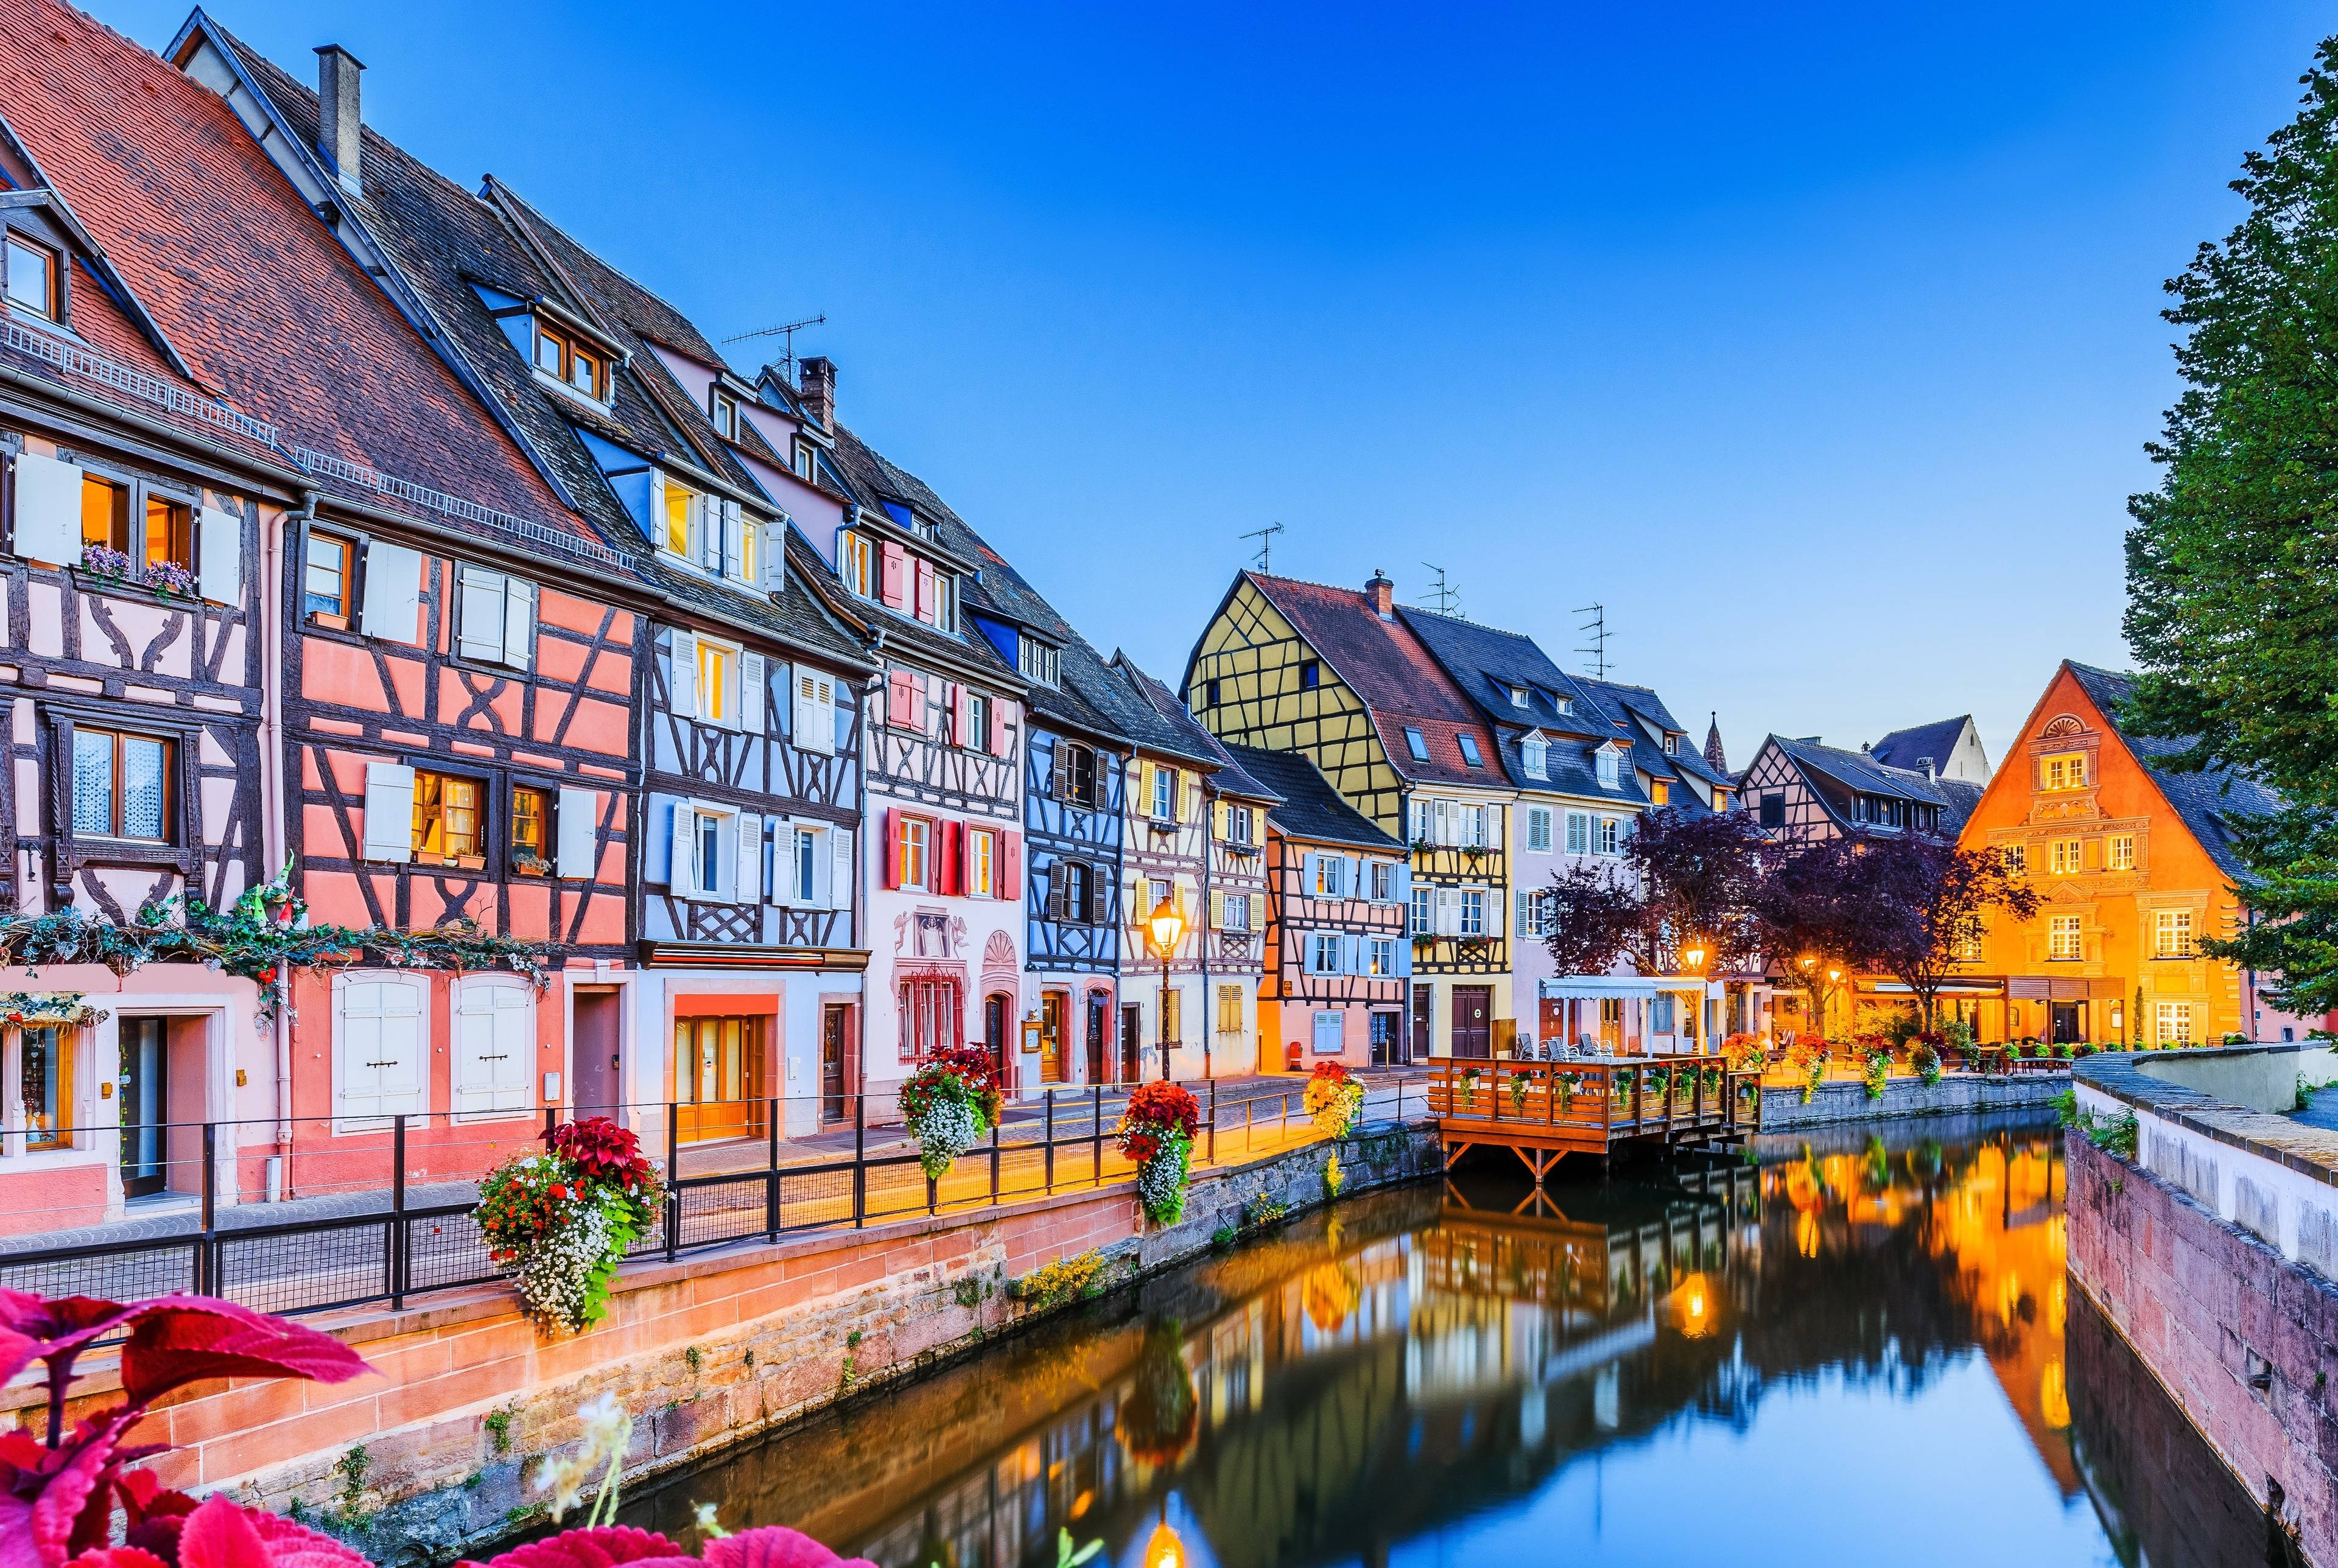 An Enlightening Excursion of Culture and History From Zurich to Strasbourg